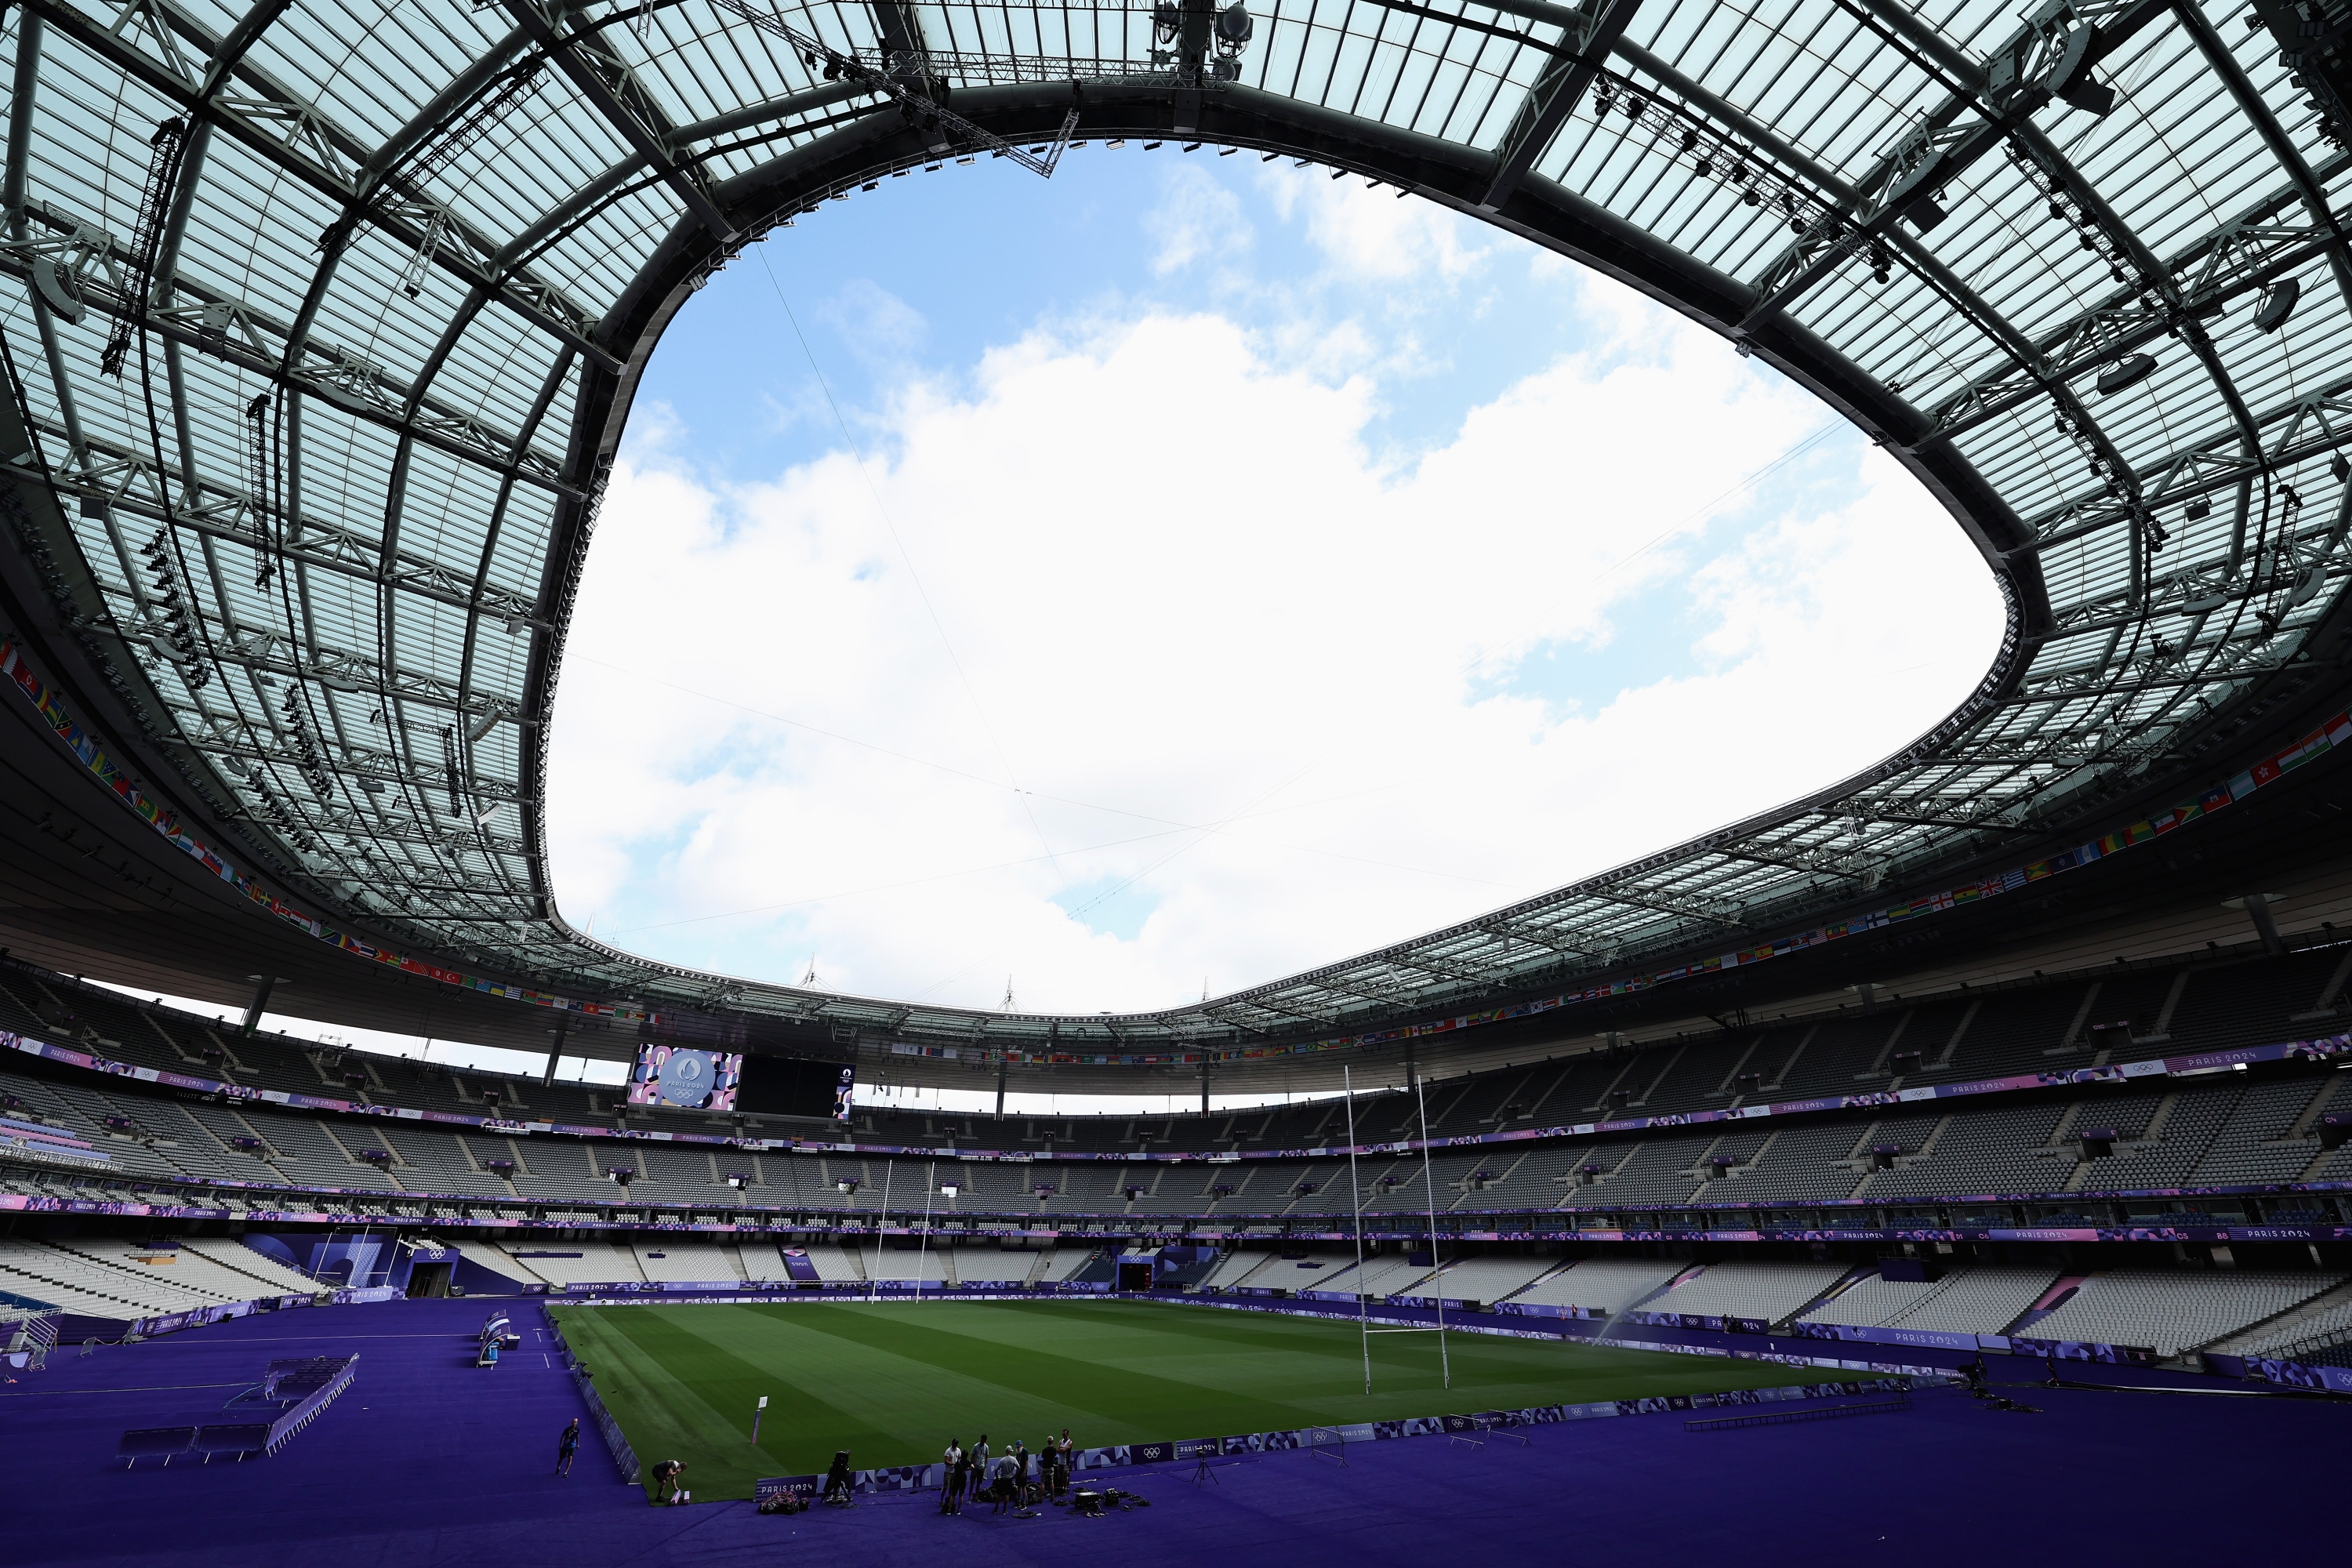 PARIS, FRANCE - JULY 22: A general view of the Rugby Sevens venue at Stade de France ahead of the Paris 2024 Olympic Games on July 22, 2024 in Paris, France. (Photo by Cameron Spencer/Getty Images)